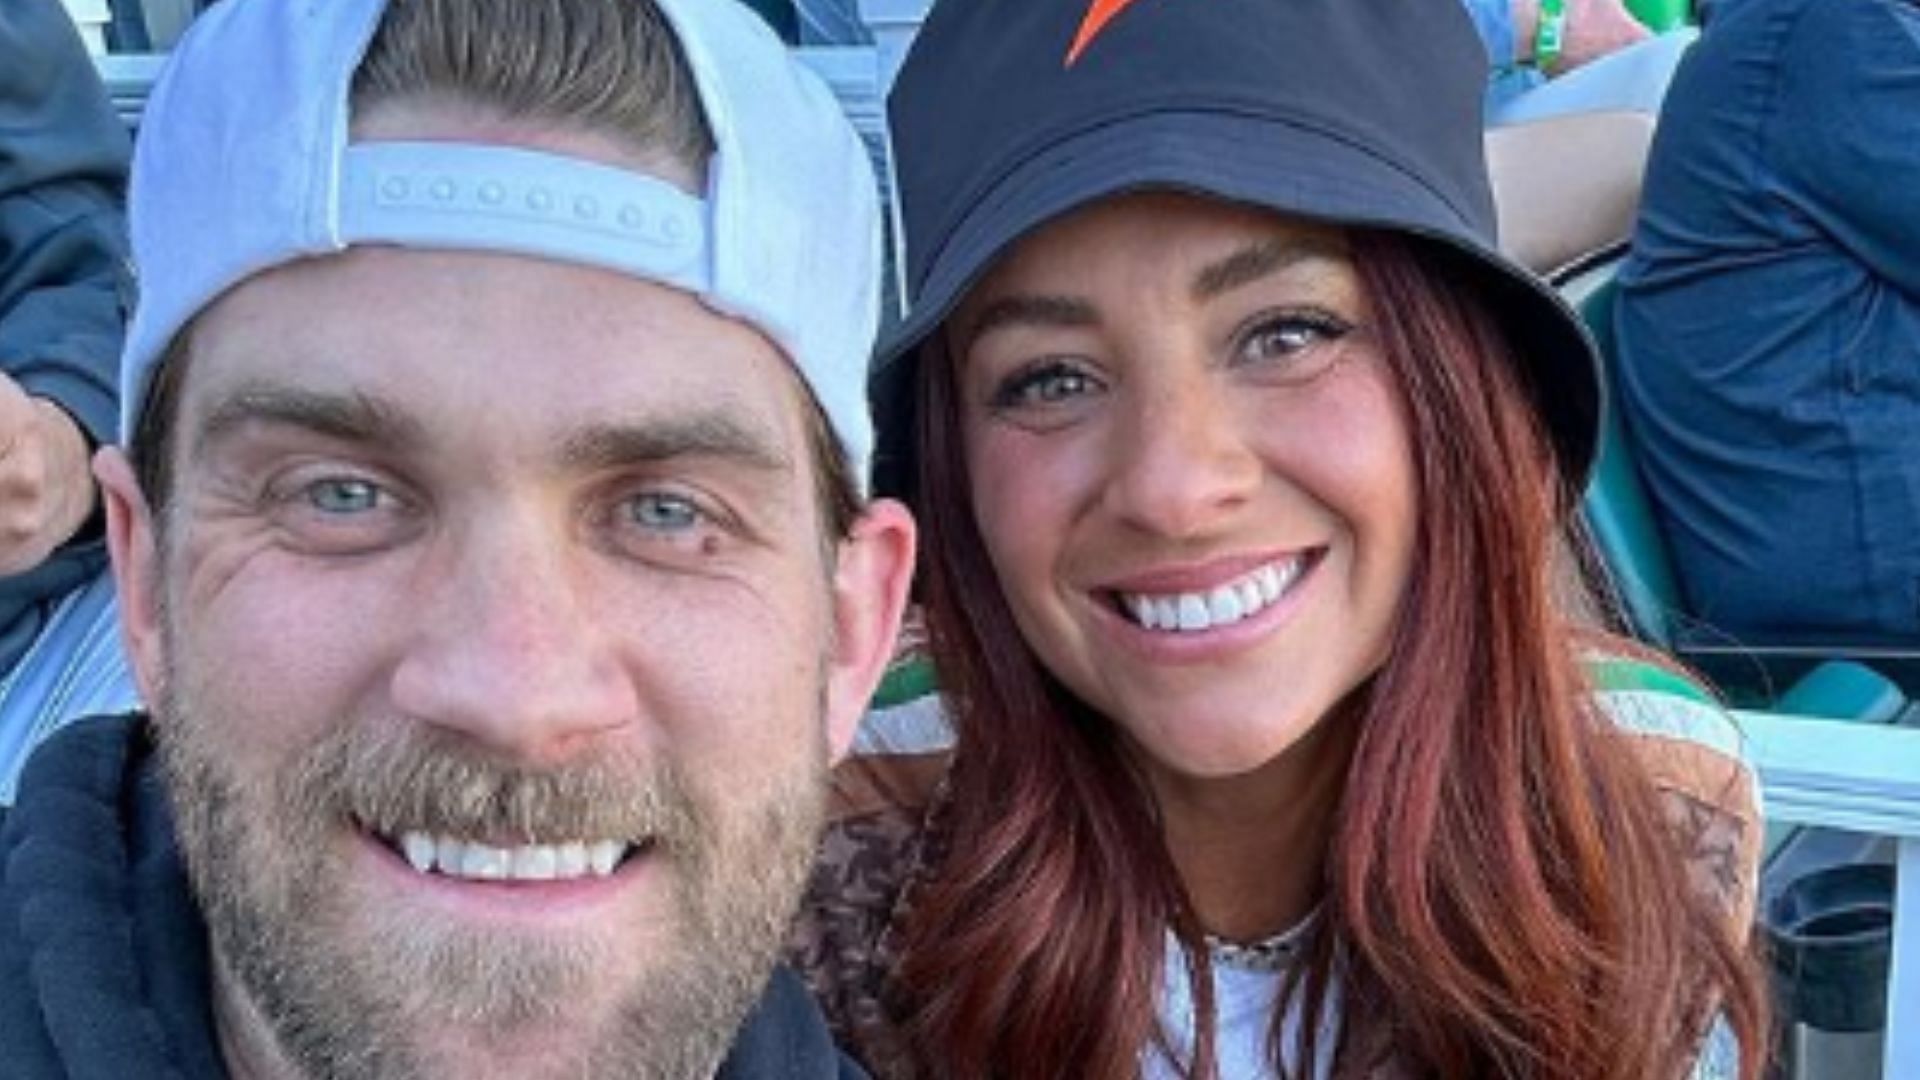 Who Is Bryce Harper's Wife? Inside the Couple's Relationship